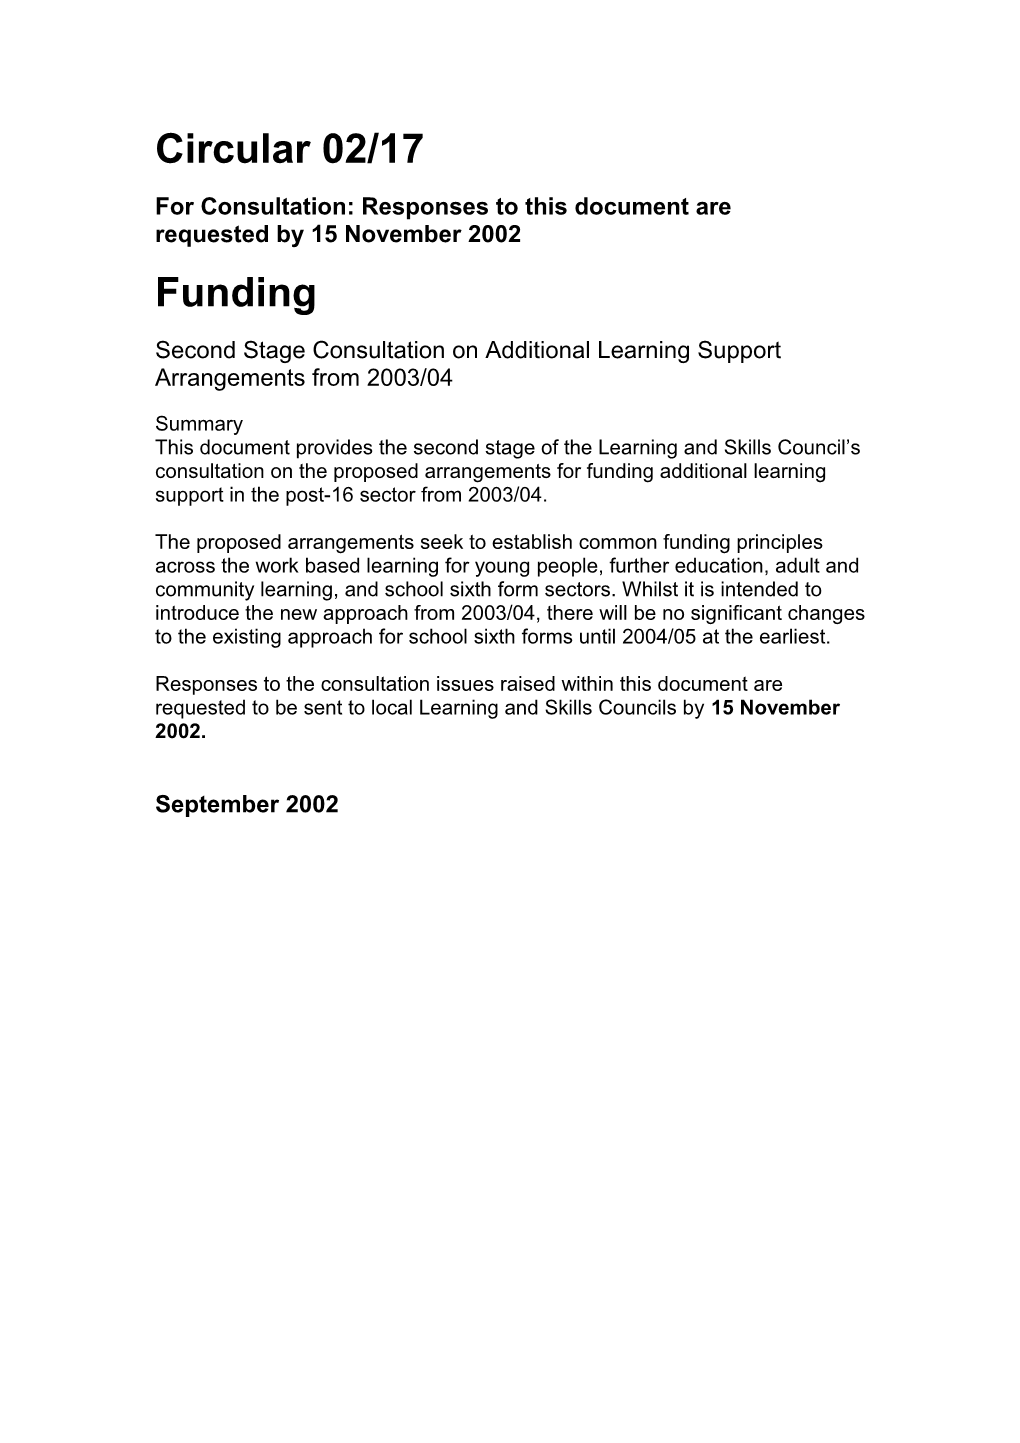 For Consultation: Responses to This Document Are